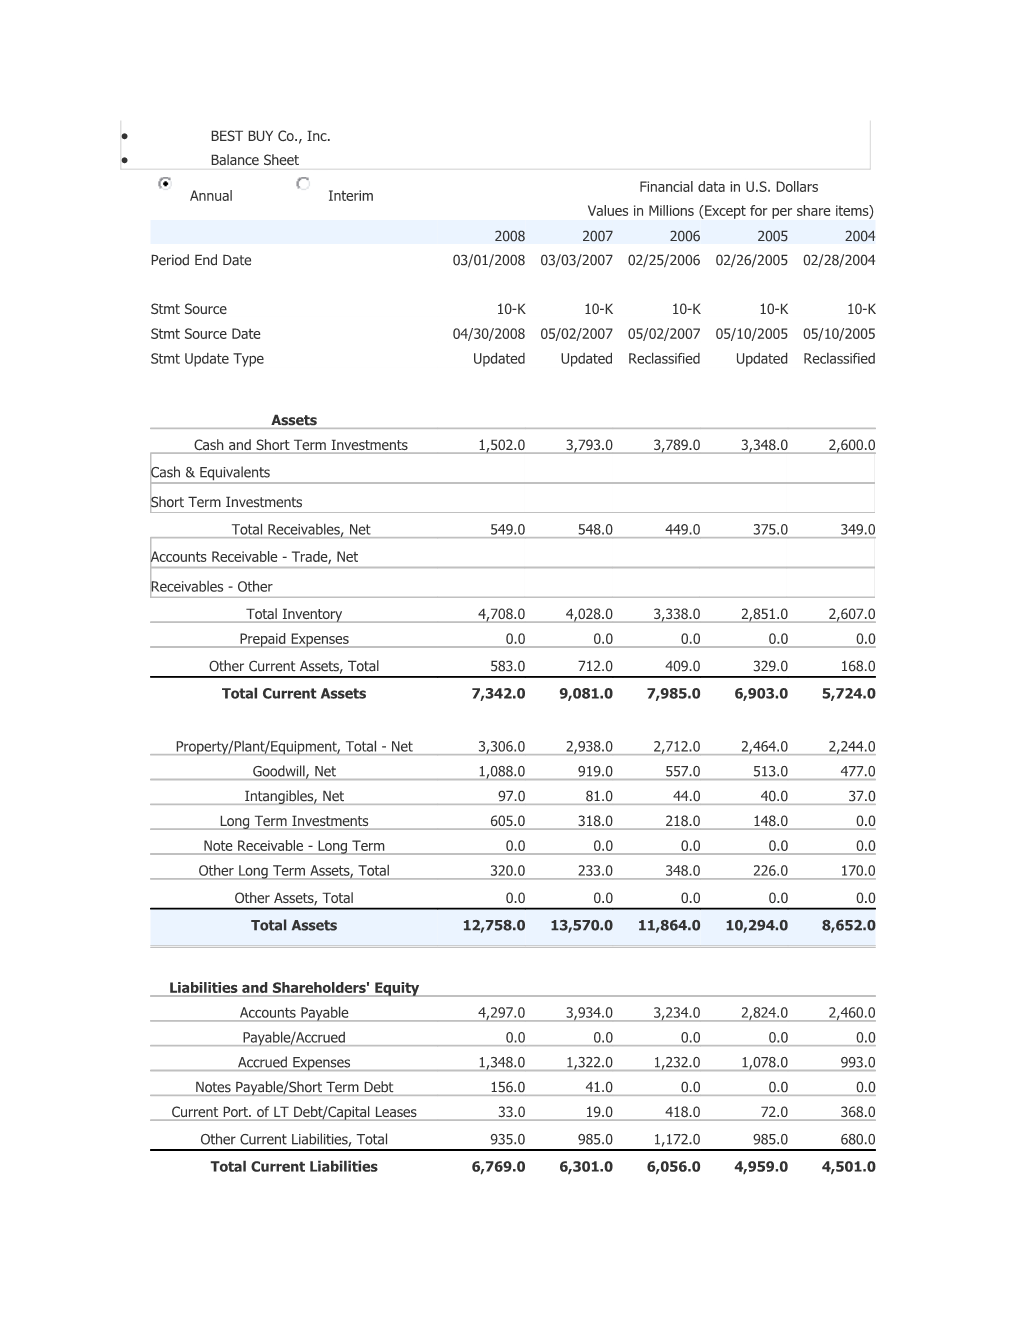 Income Statement - 10 Year Summary (In Millions)